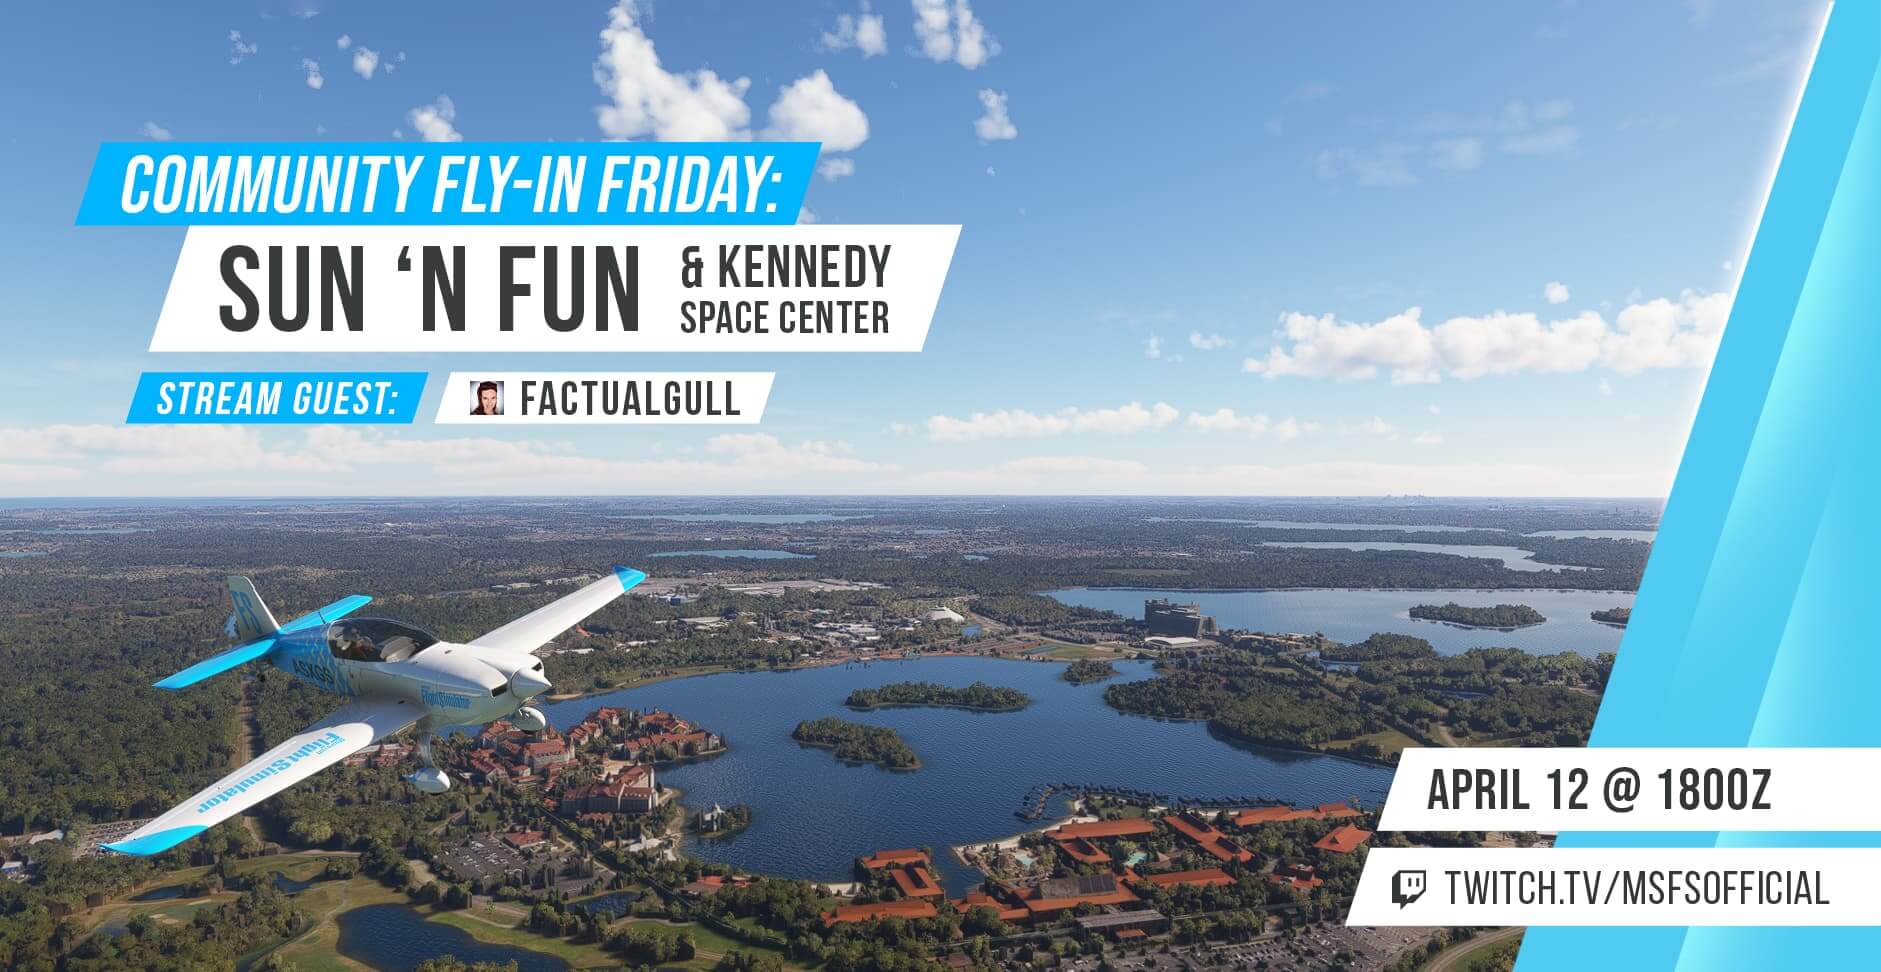 Community Fly-In Friday: Sun 'N Fun & Kennedy Space Center. April 12th at 1800 UTC. twitch.tv/msfsofficial